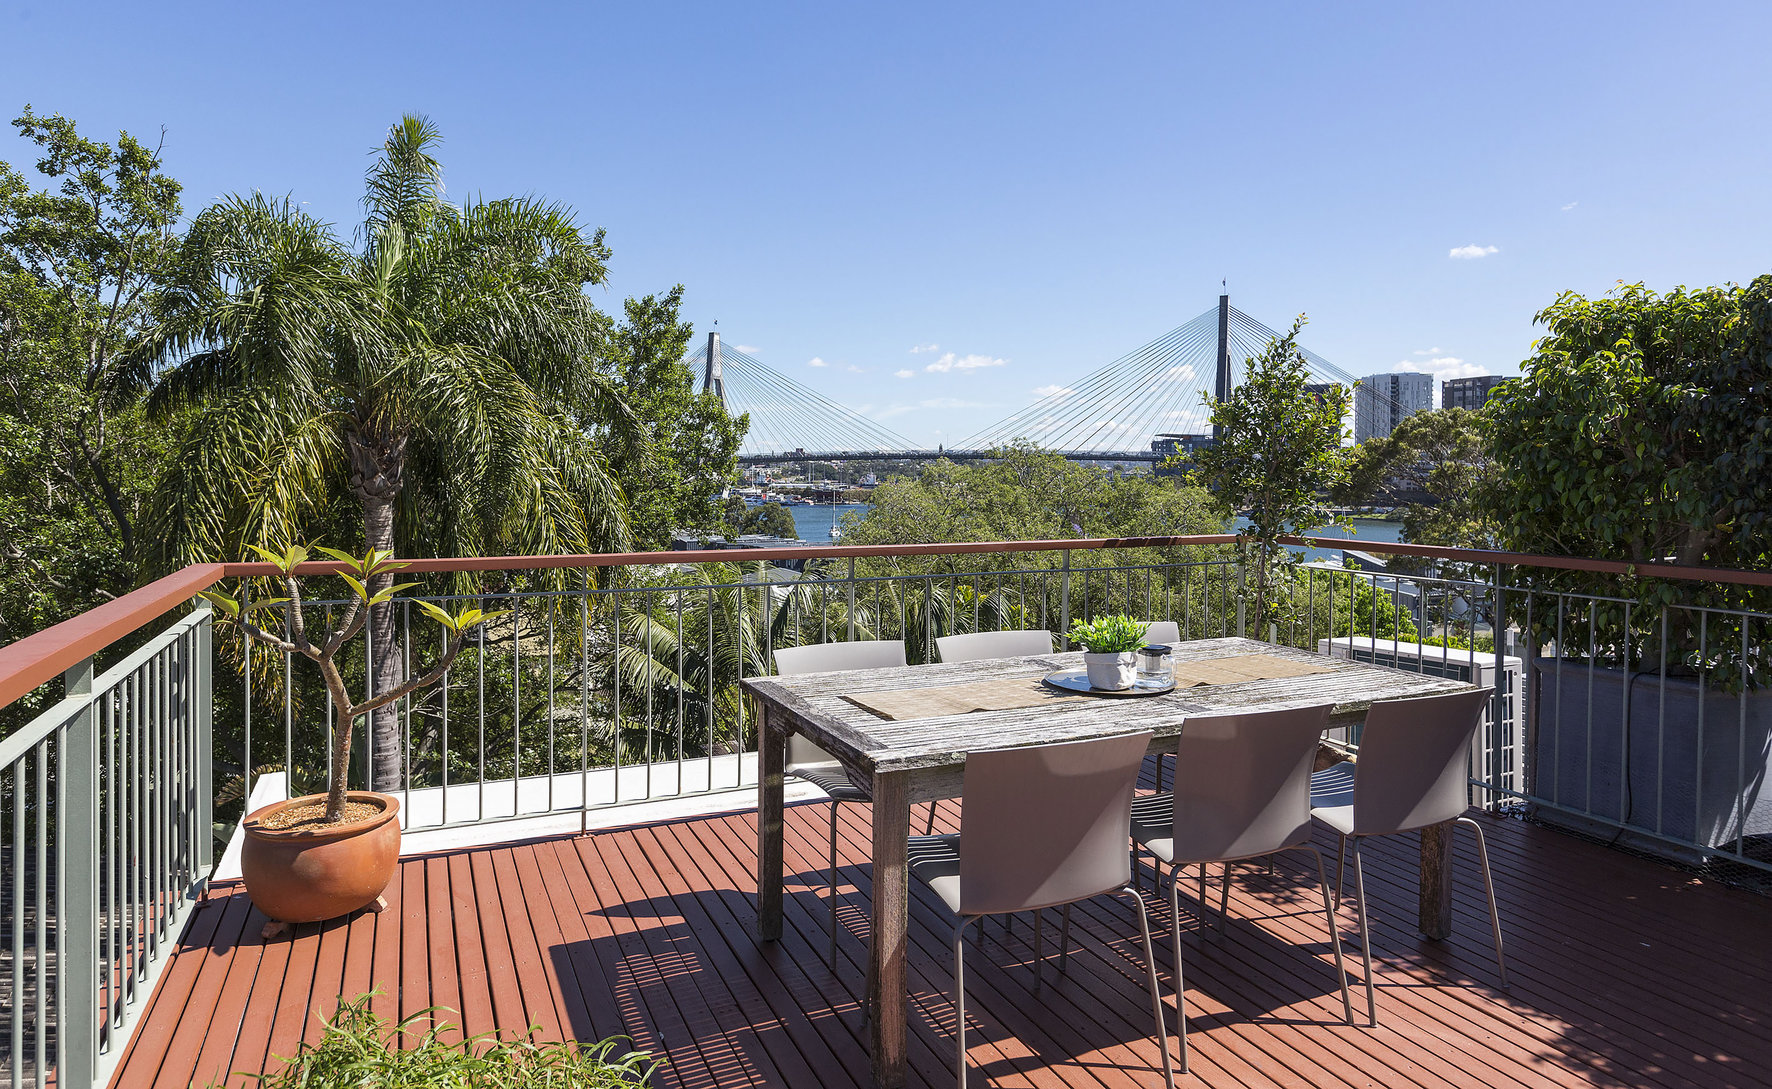 This heritage terrace in Glebe could be your new home